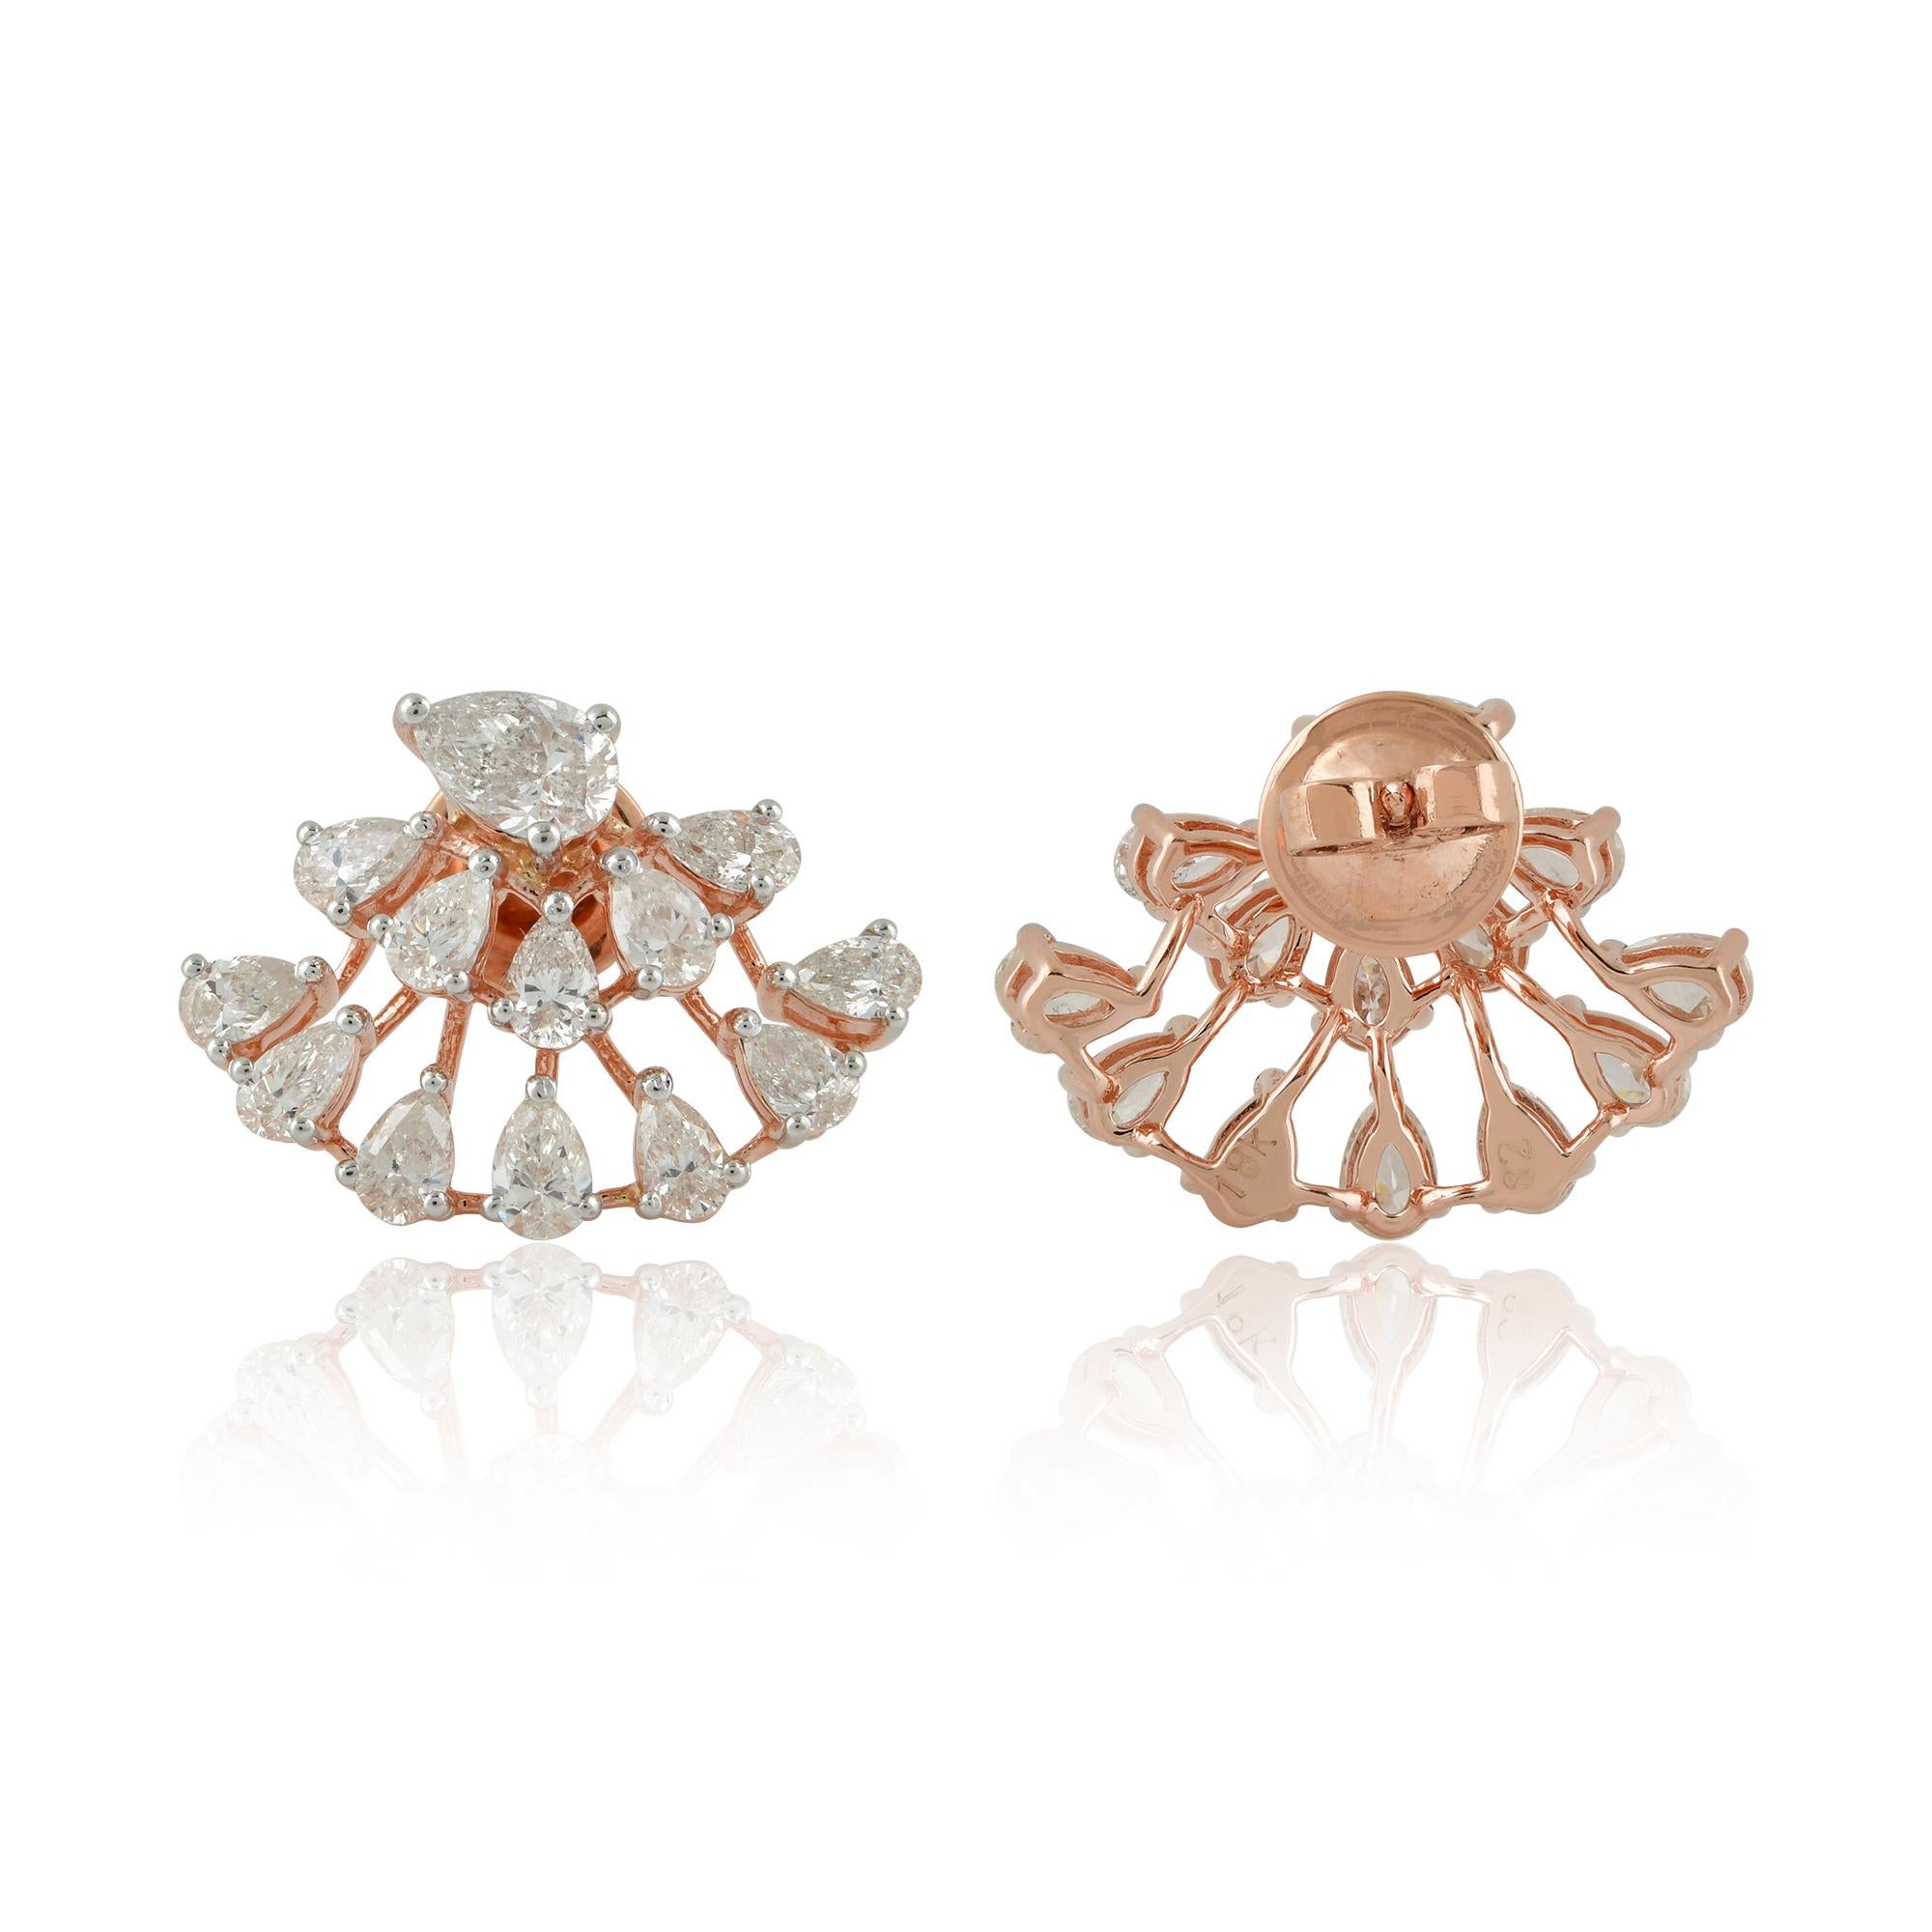 These exquisite Diamond Stud Earrings are a must-have for any jewelry collection. The delicate yet sturdy prong setting of the diamonds ensures that they stay securely in place, while the Rose Gold adds a touch of elegance and sophistication to the